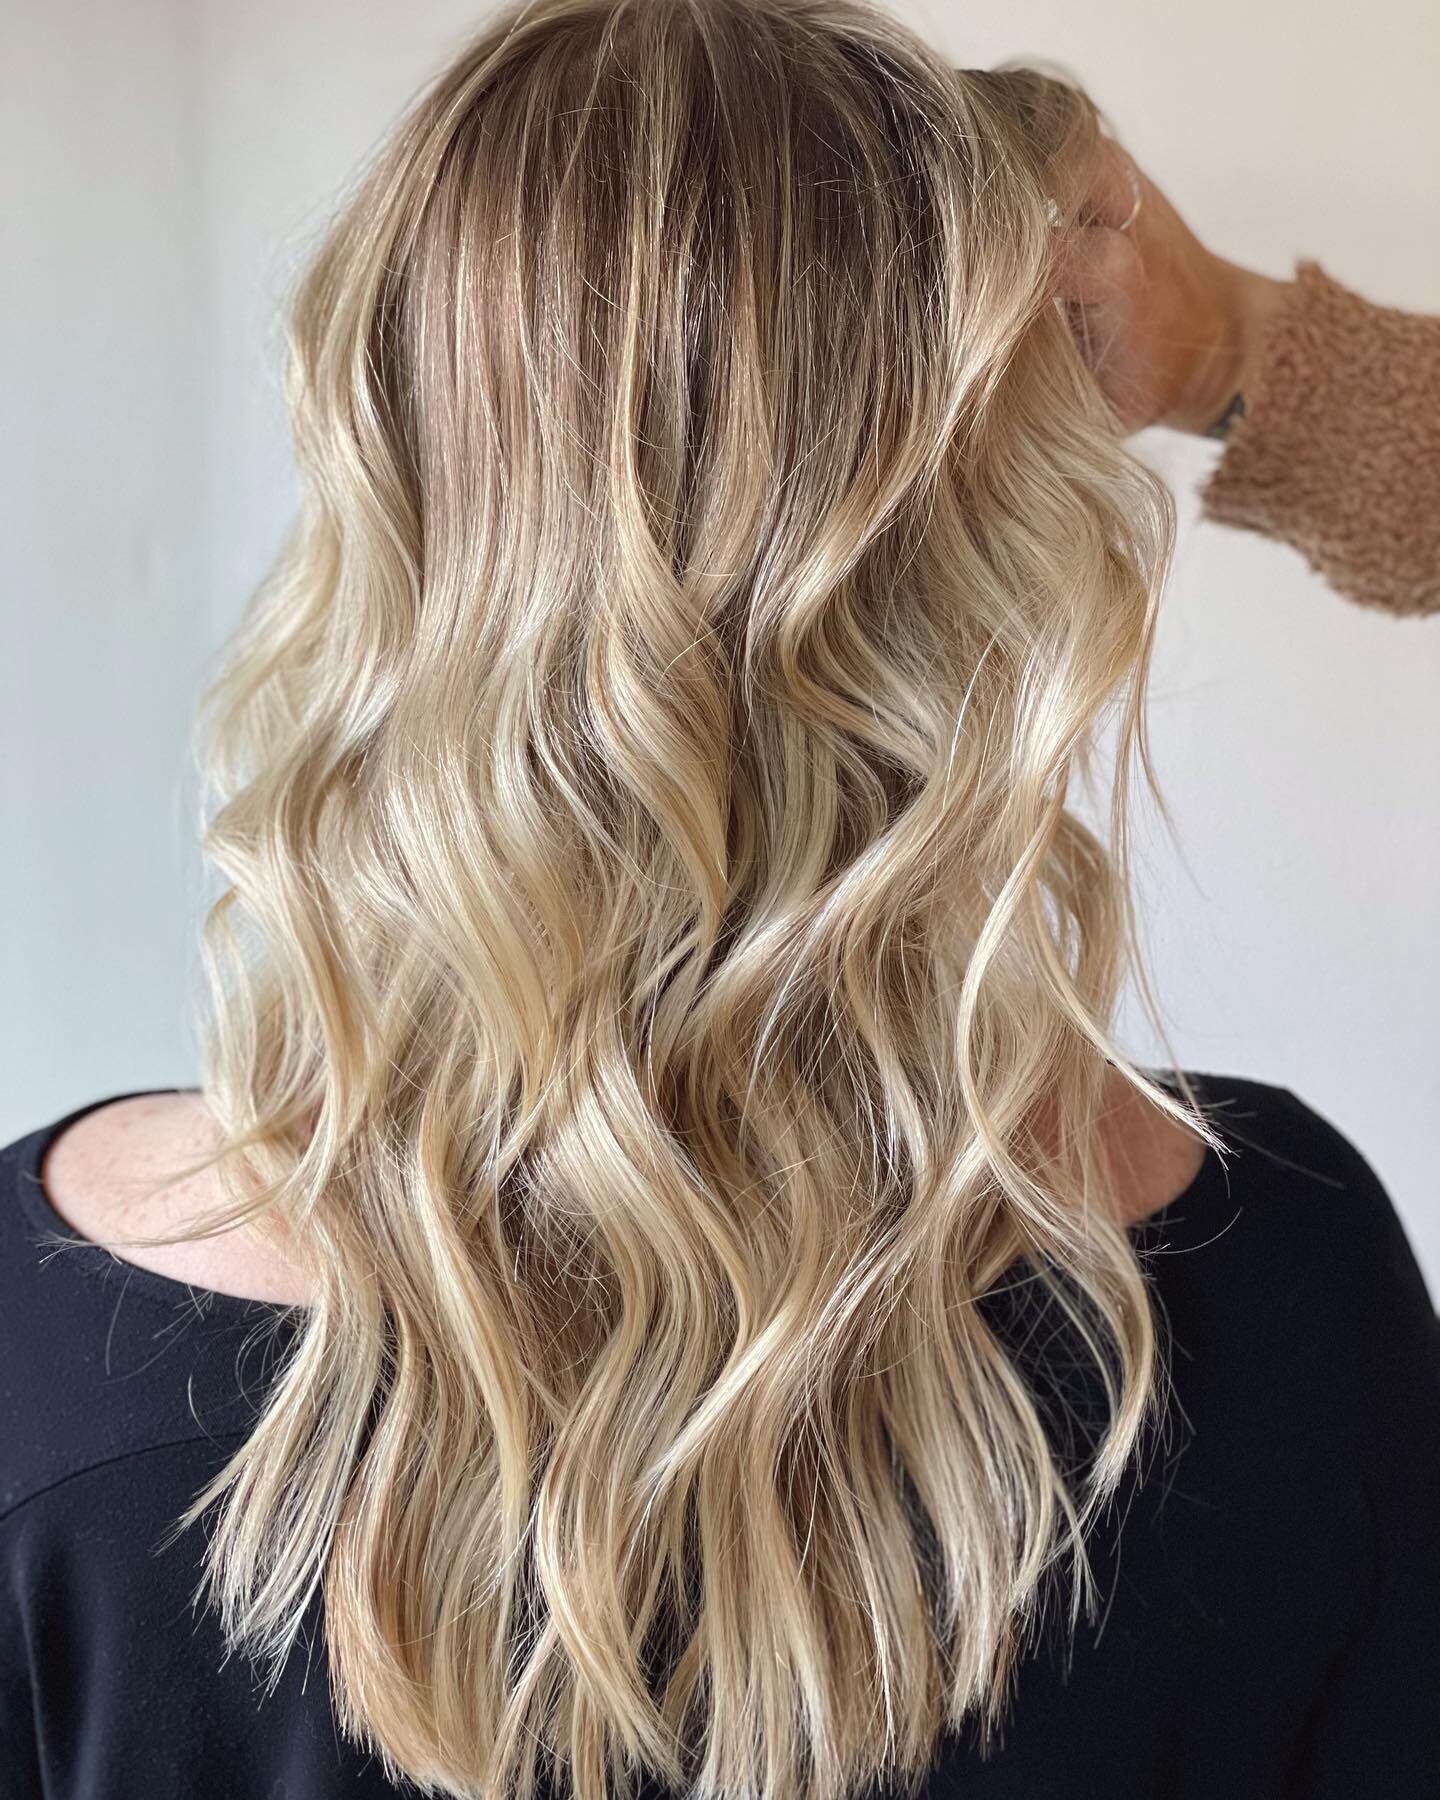 Beautifully blended balayage for the amazingly talented Connor. Check out her clay goodness @quipsandclay to see what we&rsquo;re talking about! 💫

Partial Balayage + Cut by Stylist Rachel @rachelw.thegoodhair.